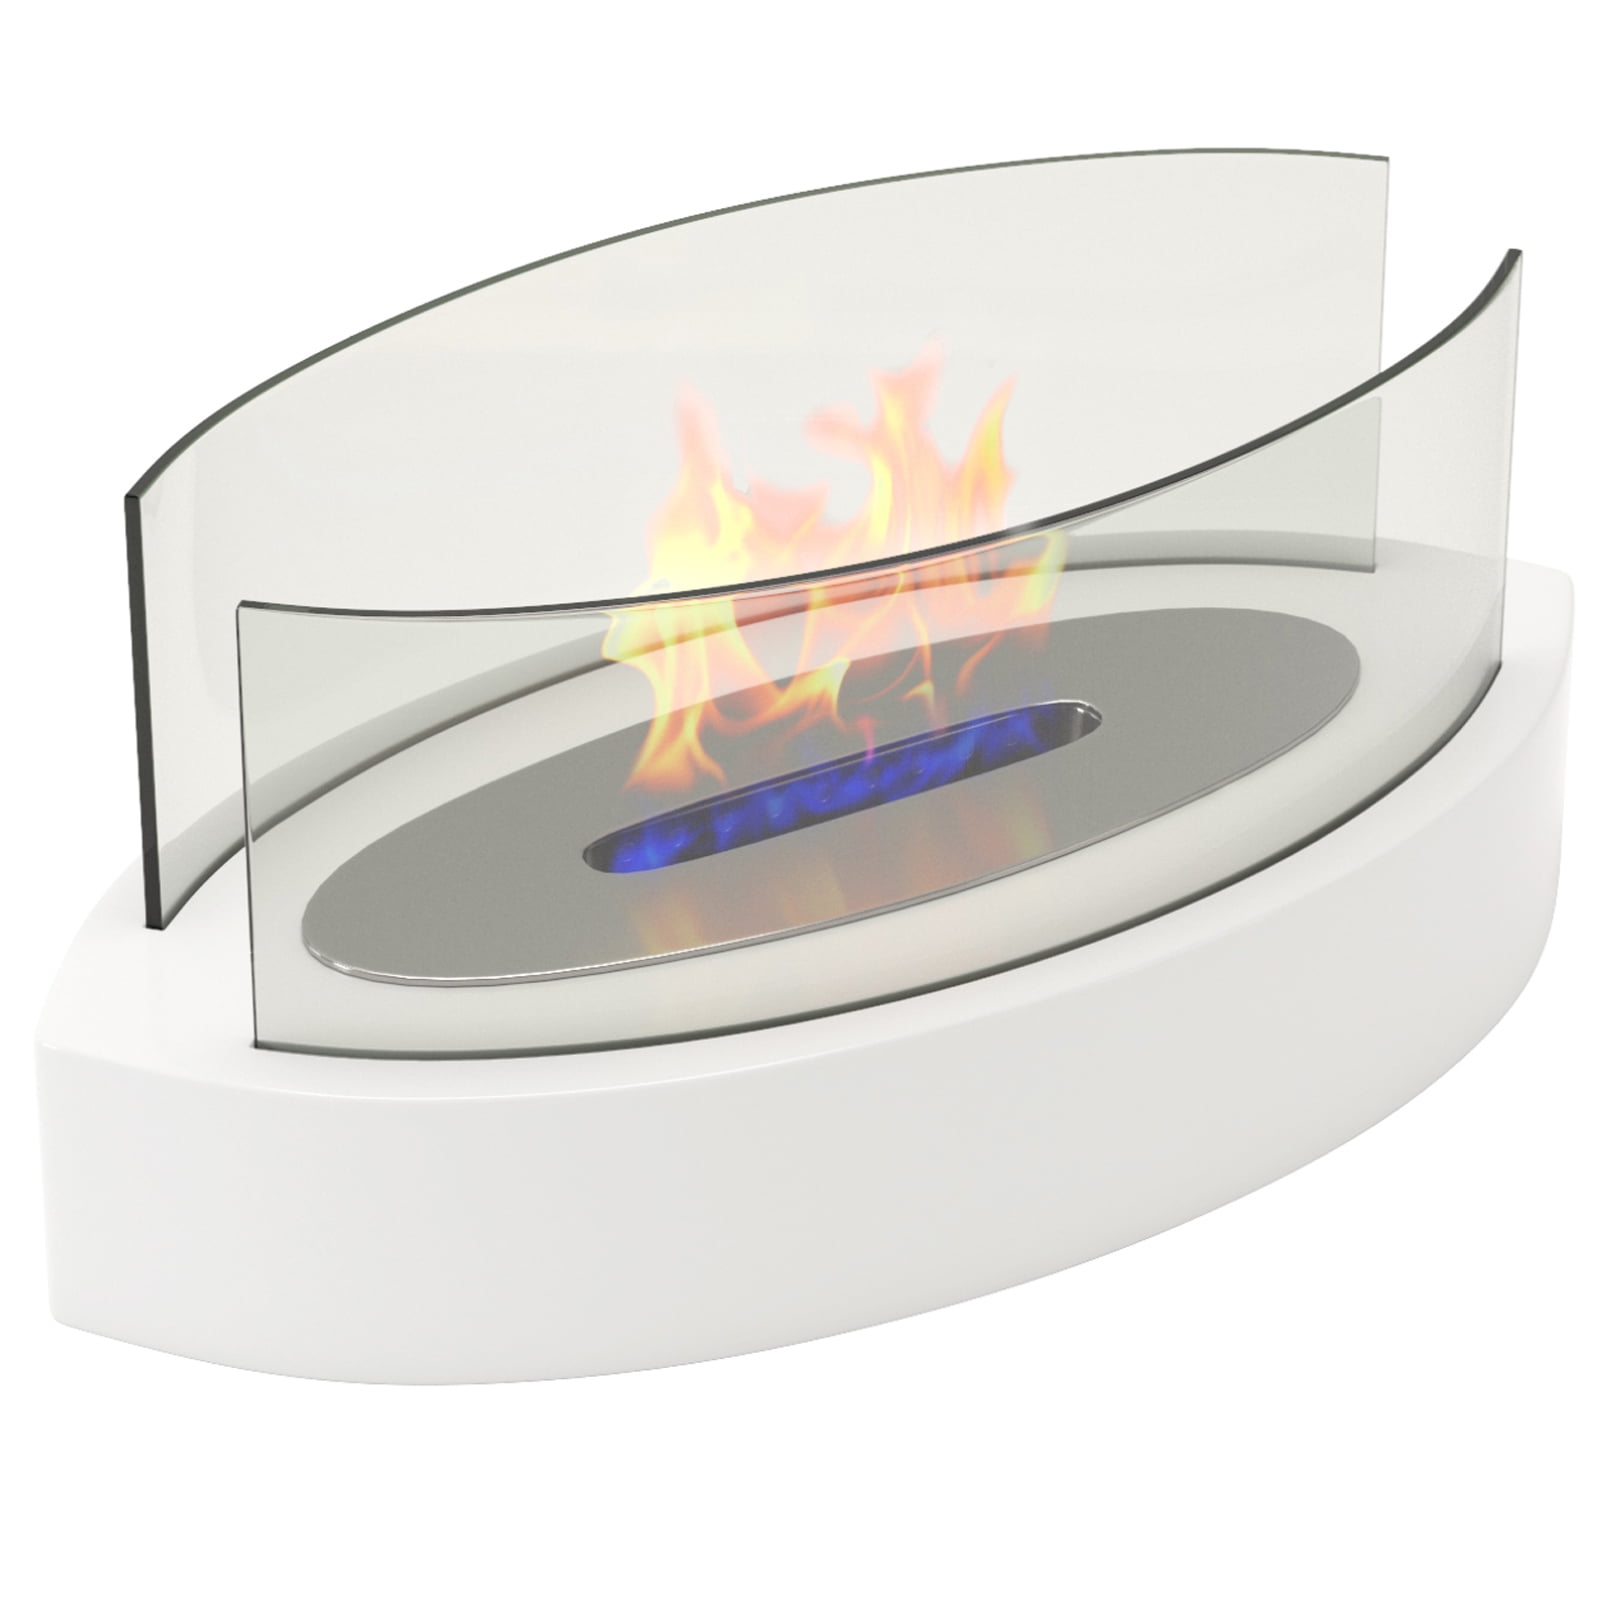 Tabletop Fireplace Fire Bowl Pot Bio Ethanol Fireplace with Glass Tube 